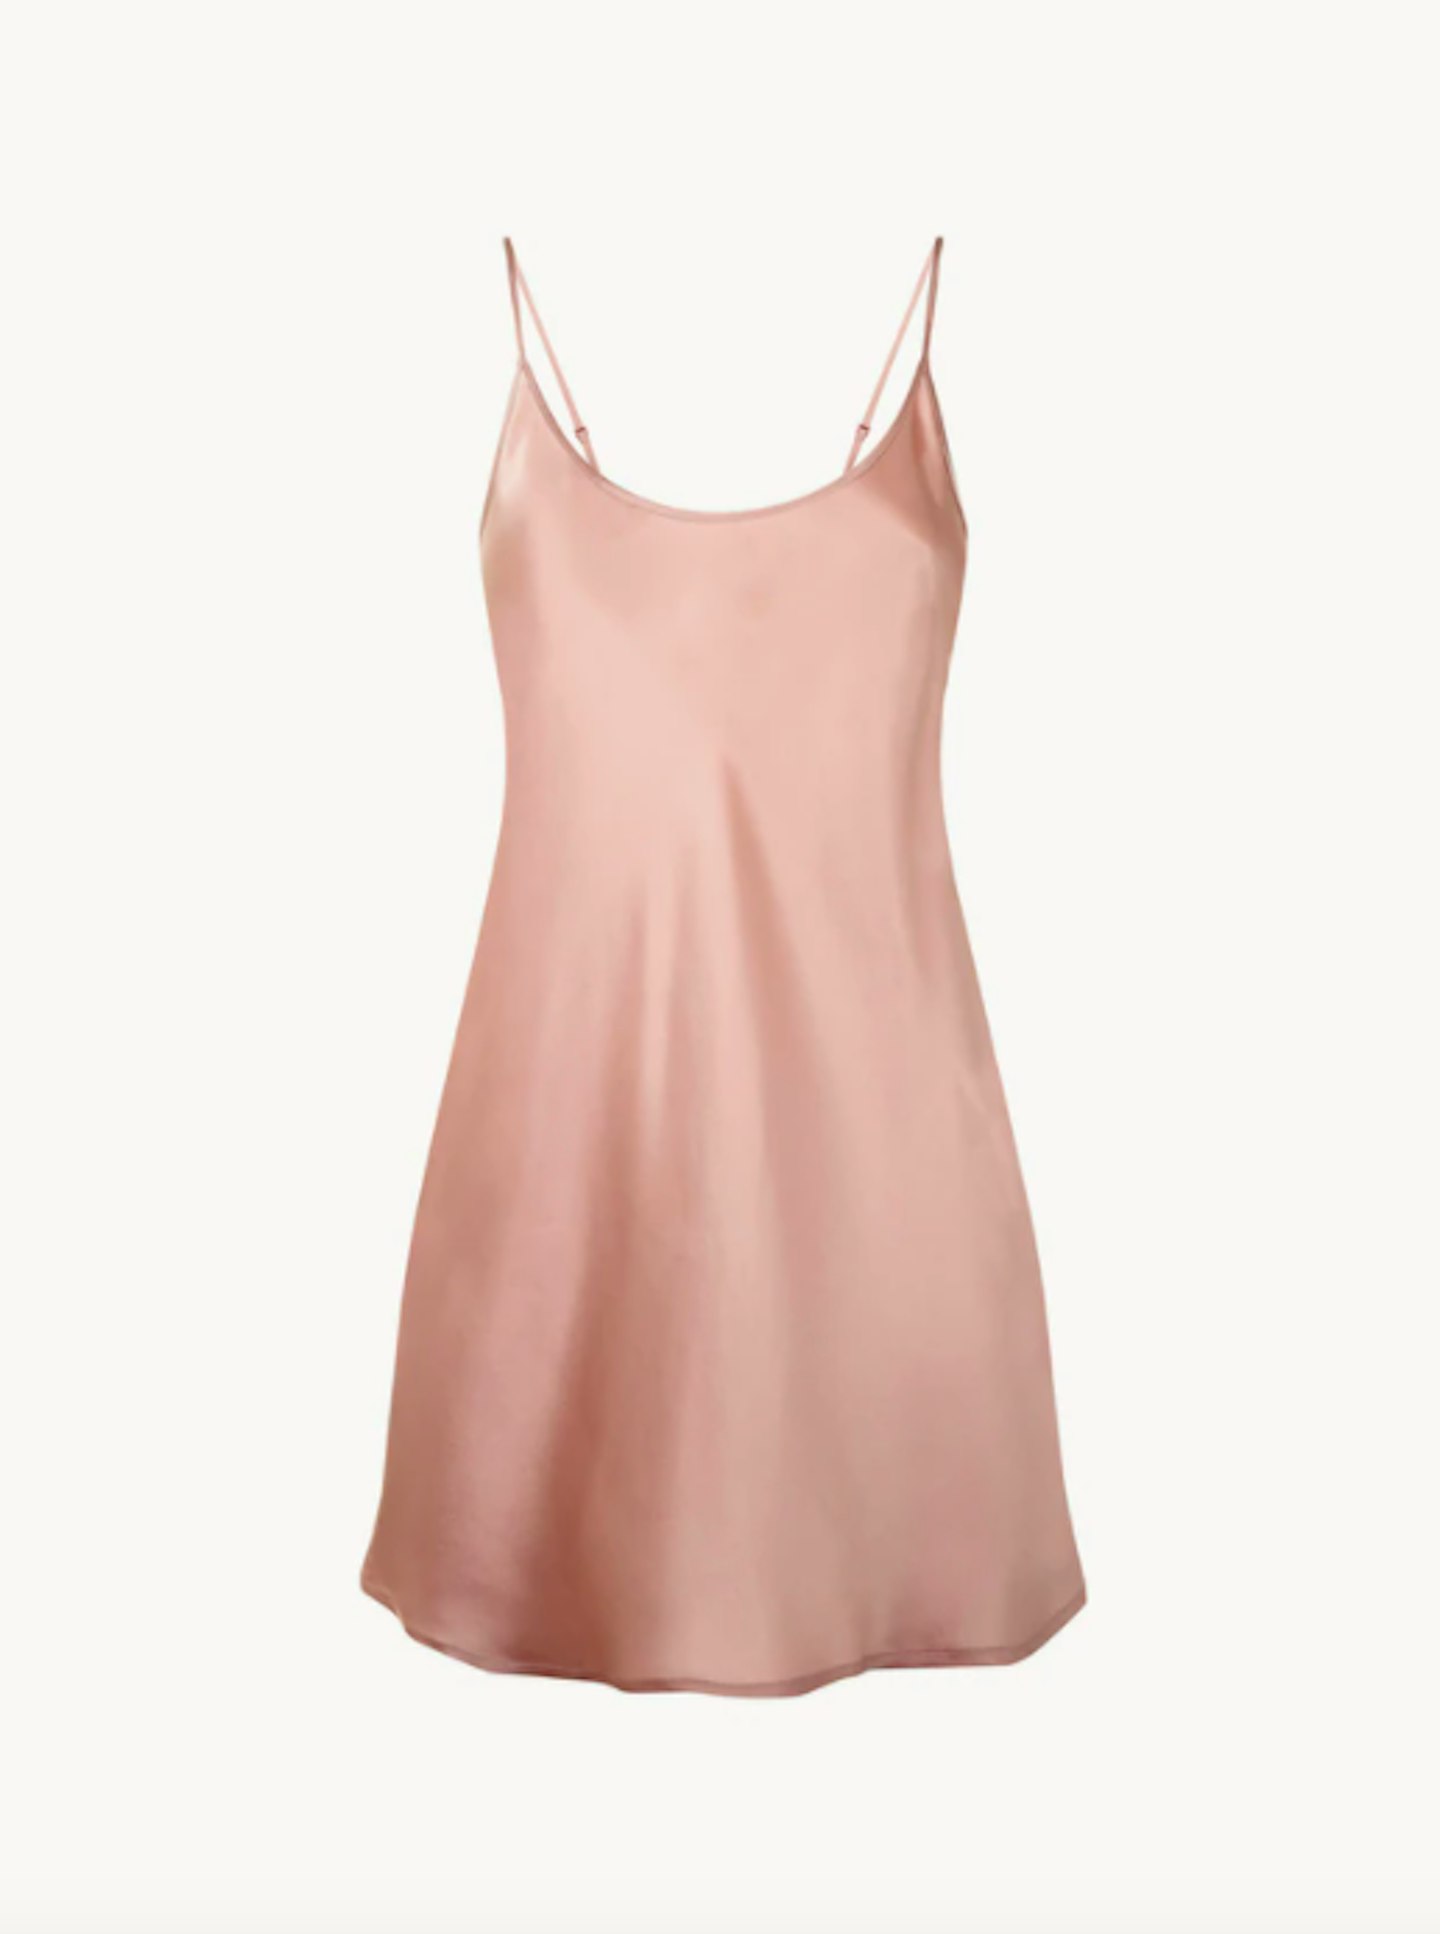 10 Best Nude Slips for Women 2022 - Top-Rated Nude Slip Dresses